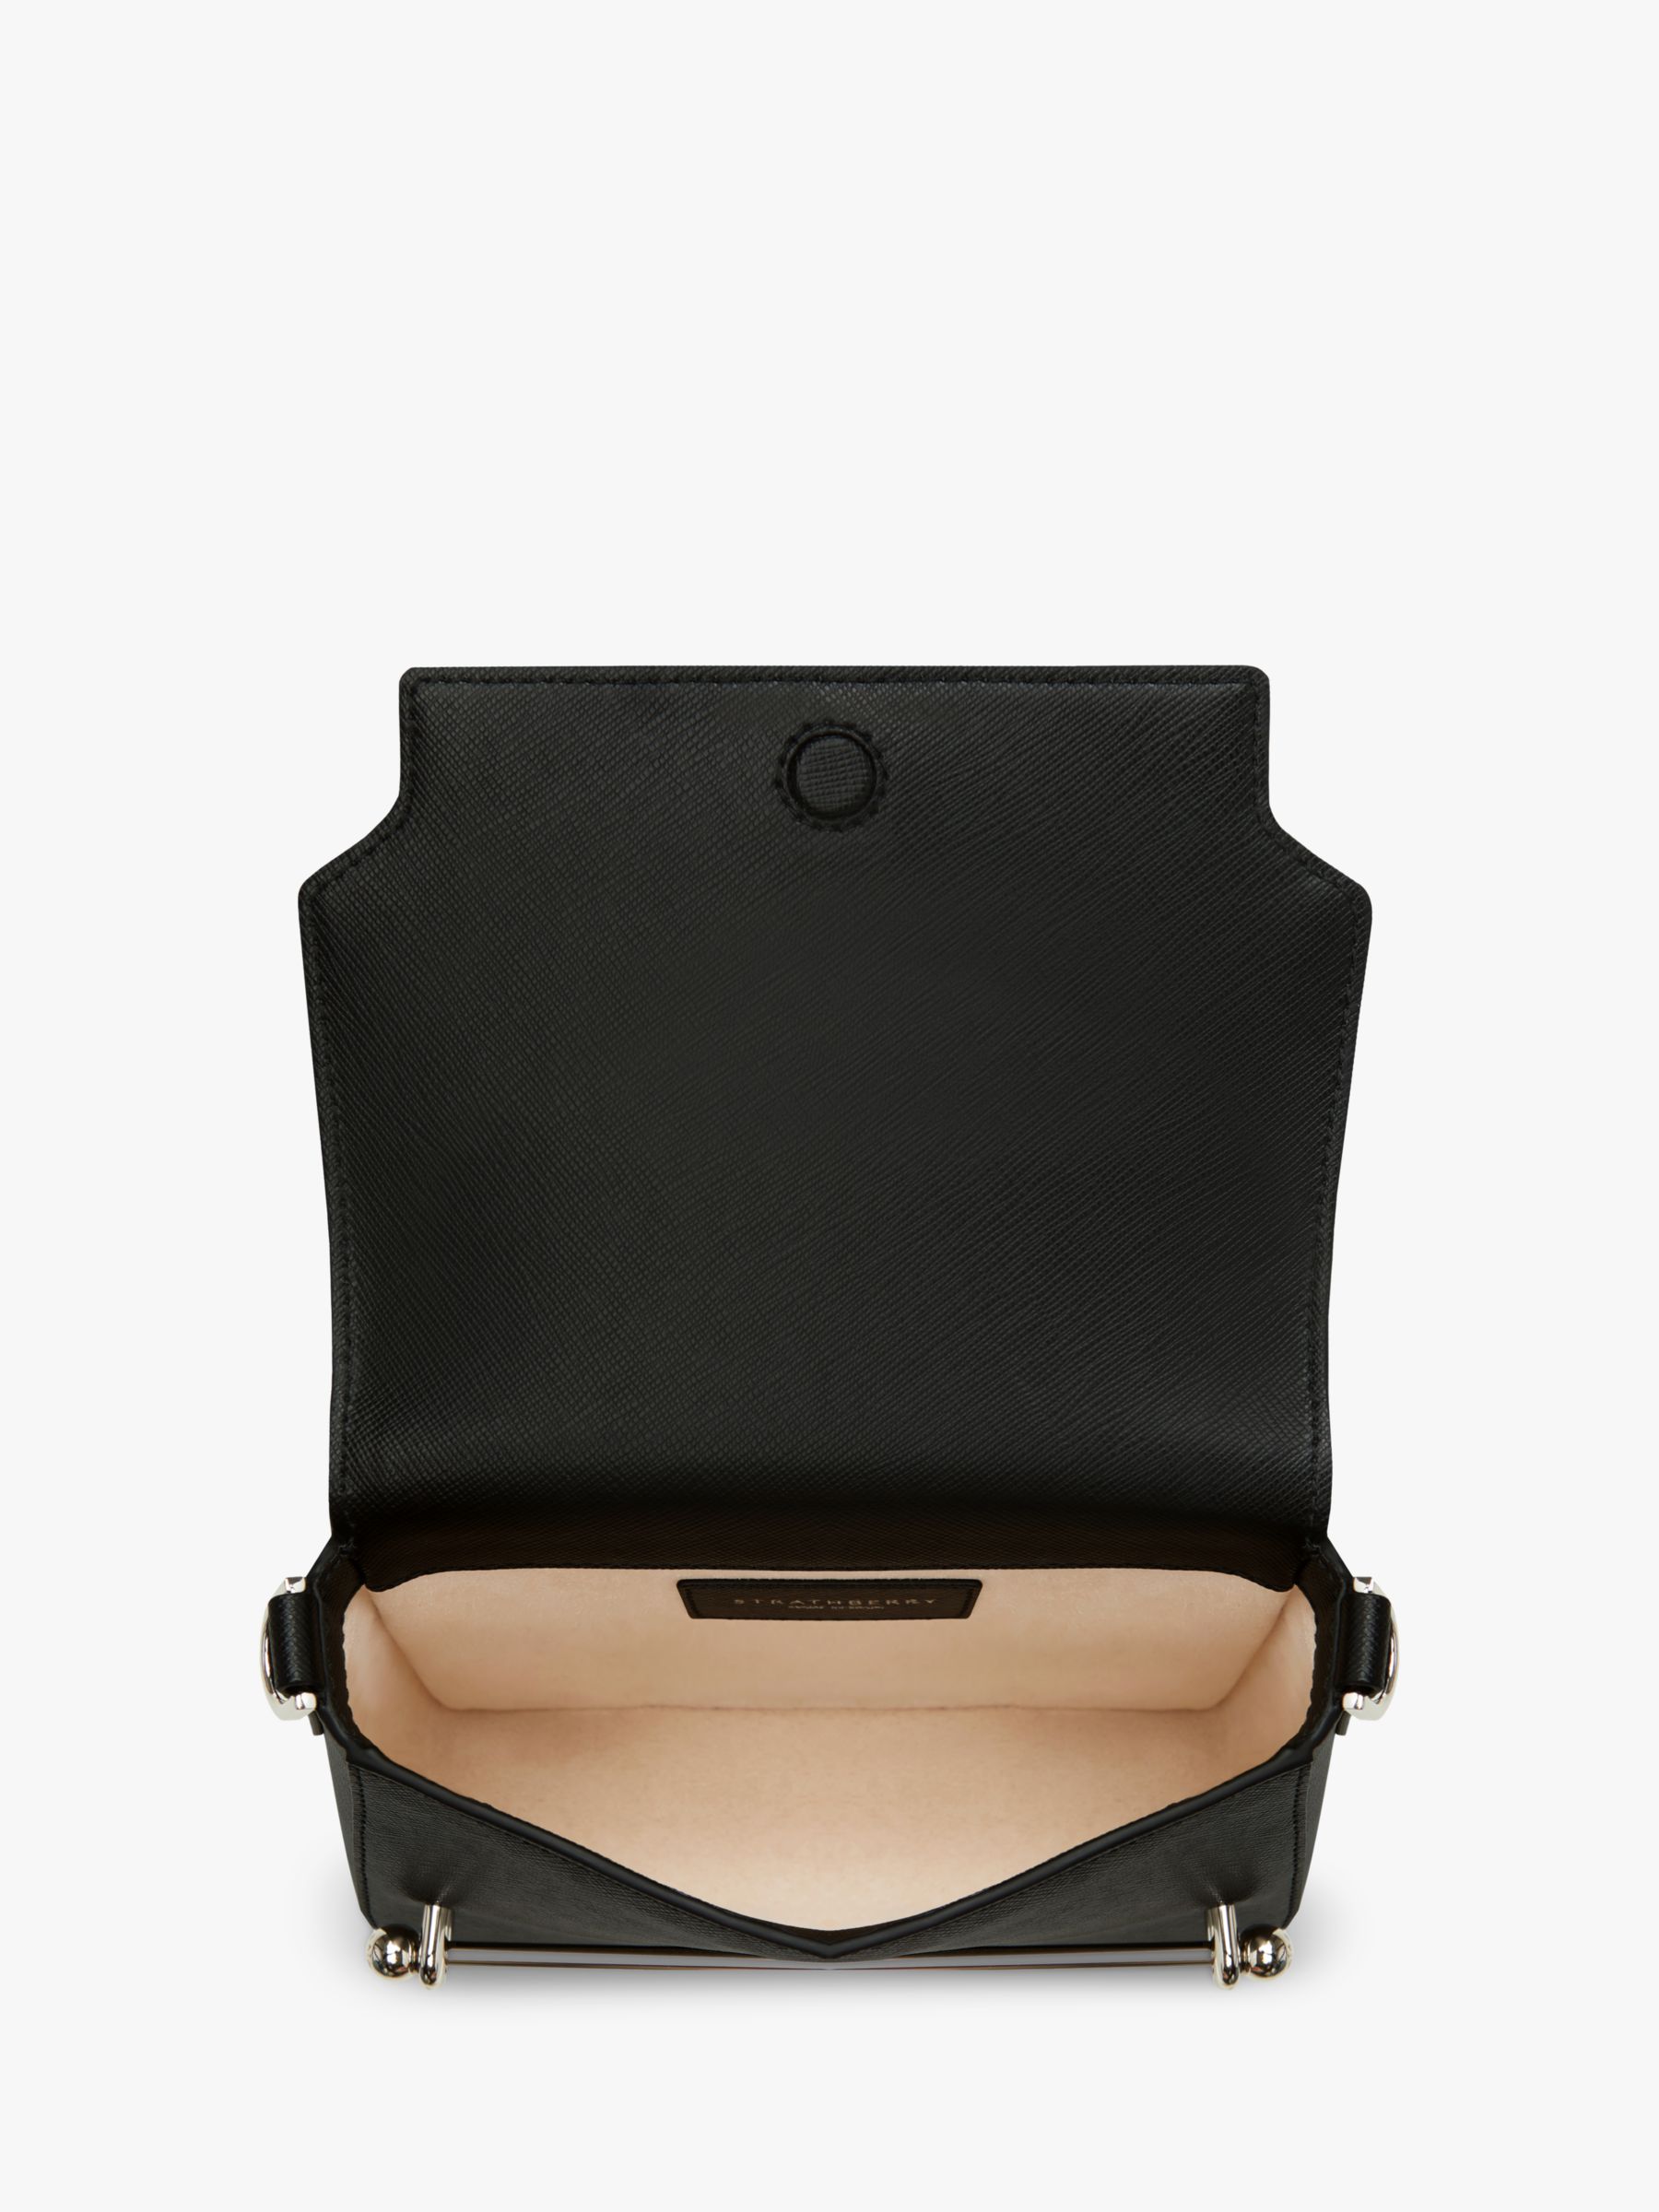 Strathberry Ace Mini Leather Cross Body Bag, Black at John Lewis & Partners